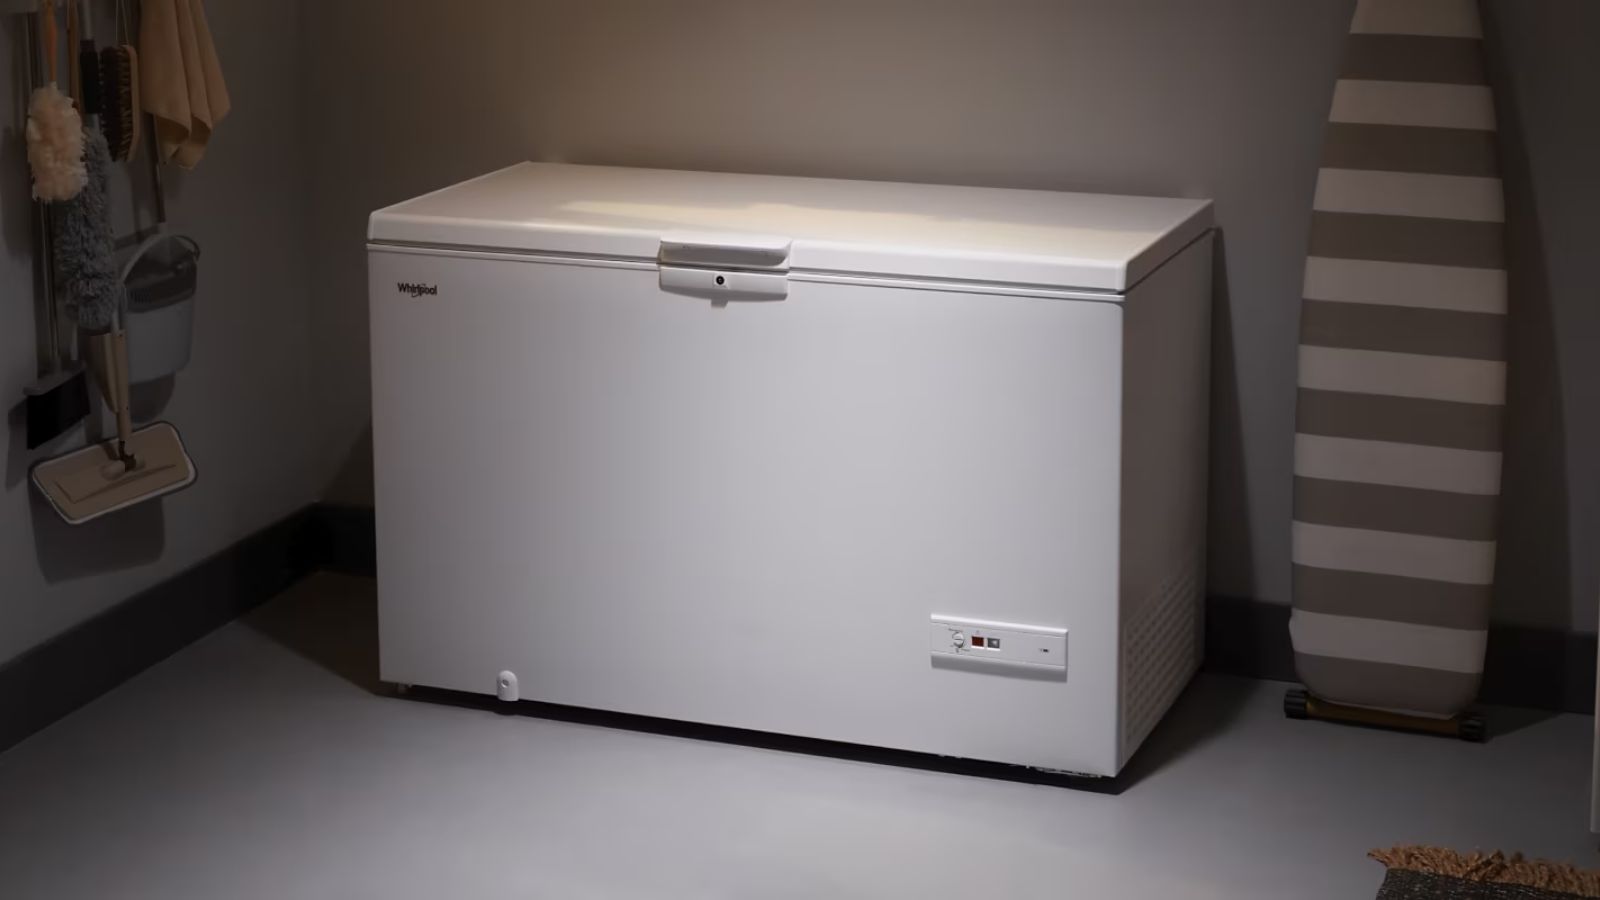 Have a question about Frigidaire SpaceWise Deep Freezer Basket? - Pg 1 -  The Home Depot